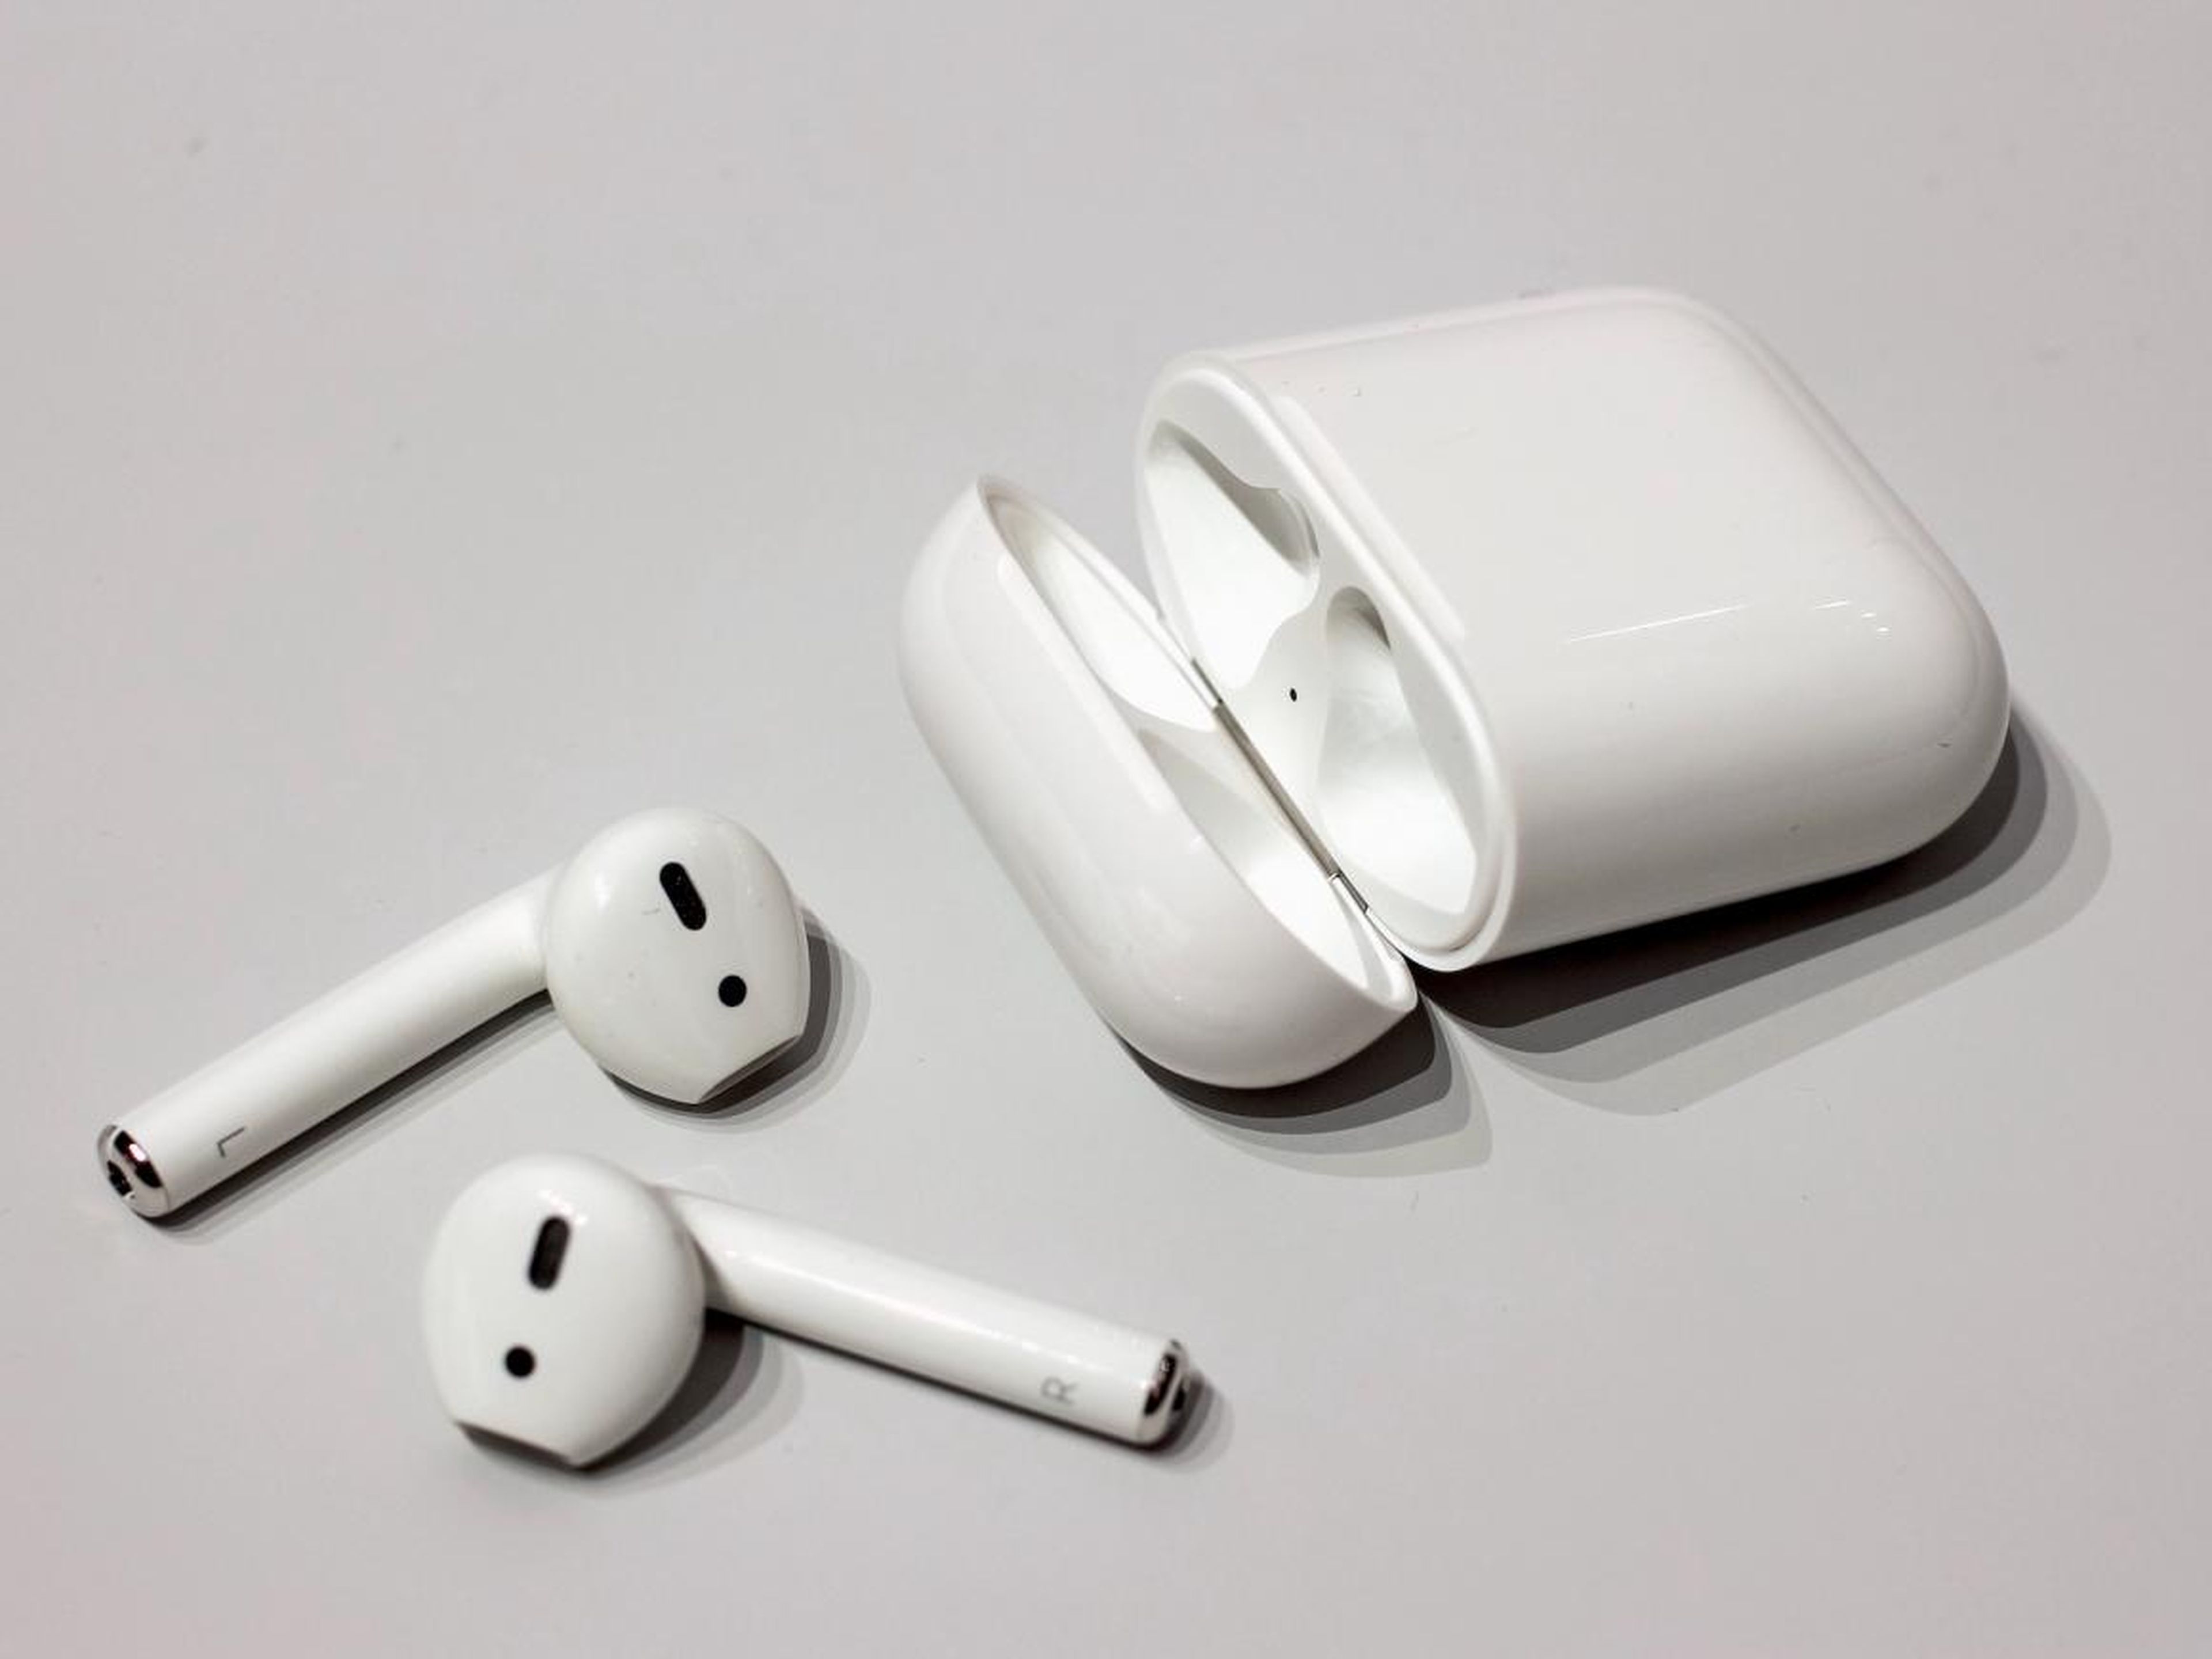 "Seashells" in Ray Bradbury's "Fahrenheit 451" resembled present-day earbuds, such as Apple's AirPods.